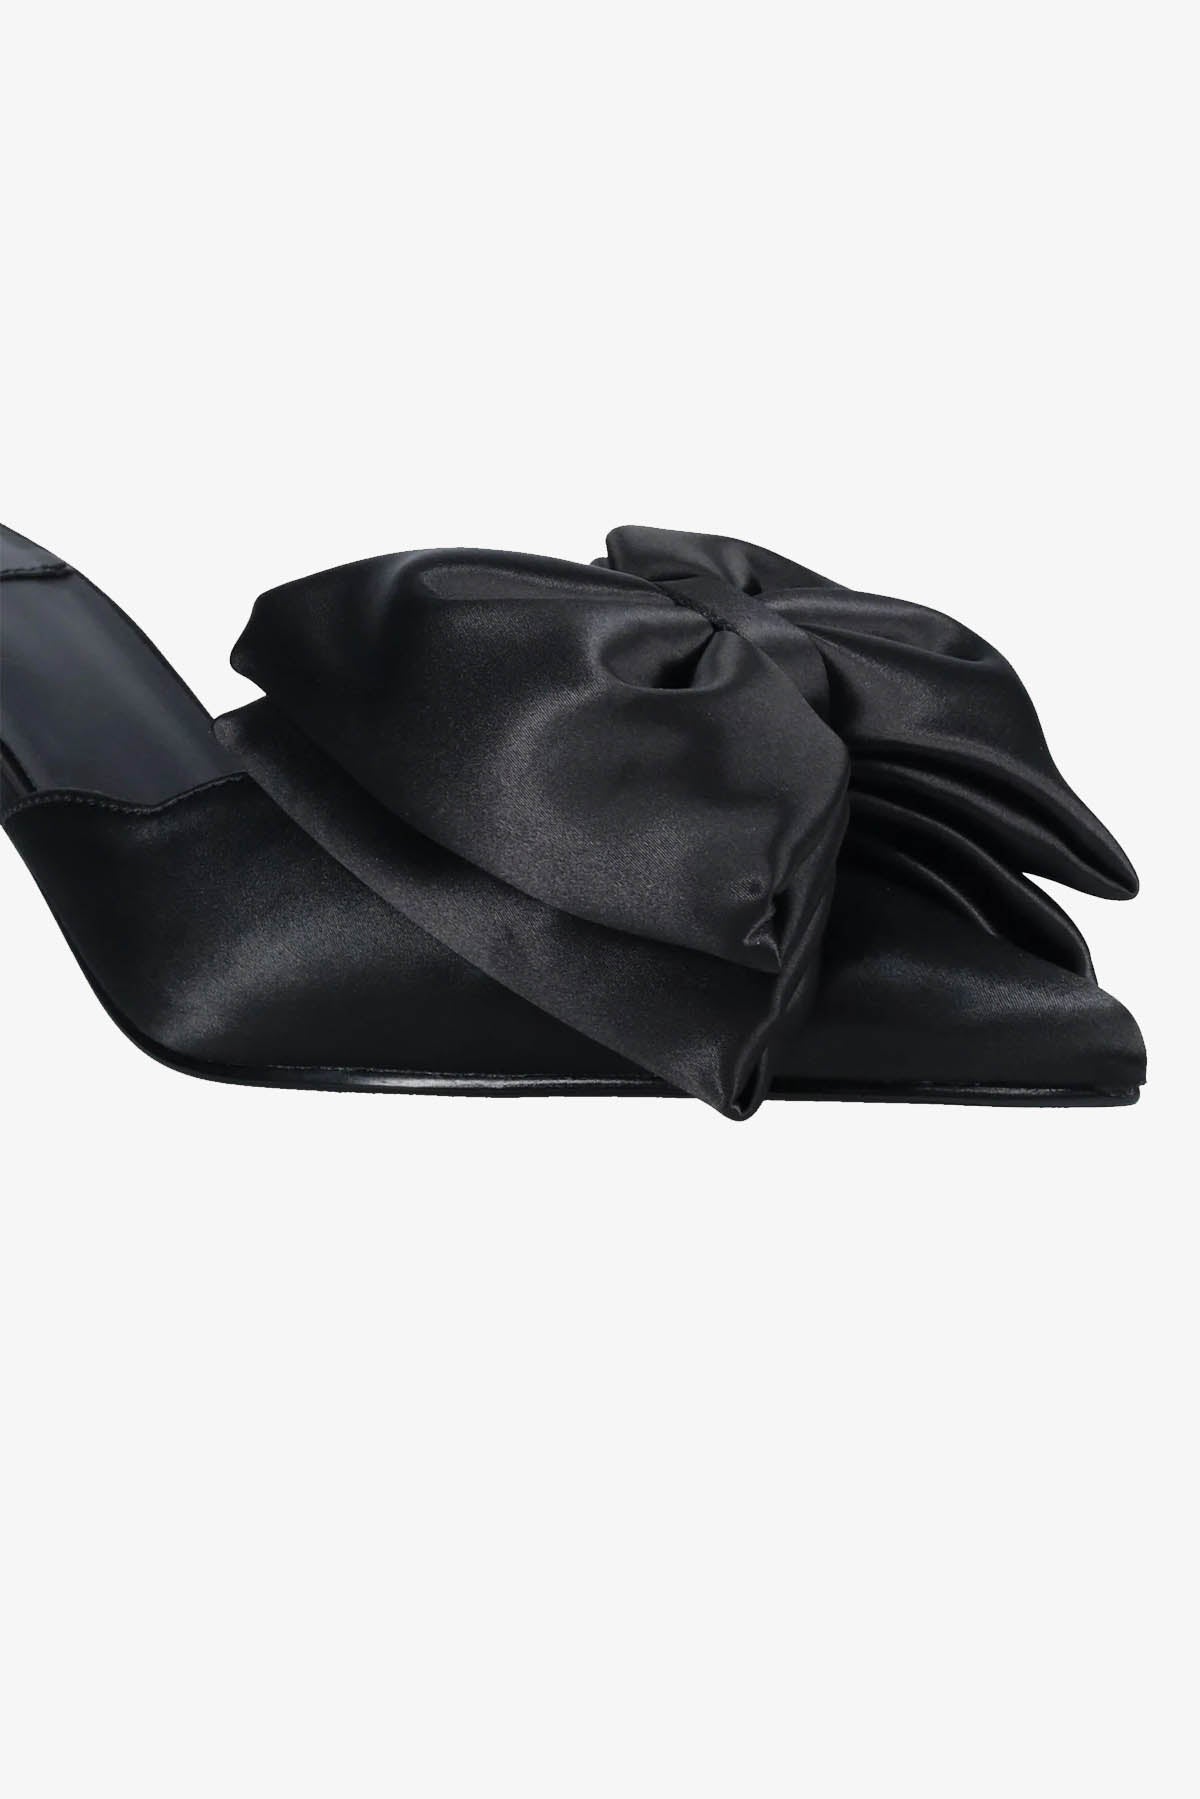 JEFFREY CAMPBELL CALZATURE  Scarpa Jeffrey Campbell Nera con Fiocco Ribbons